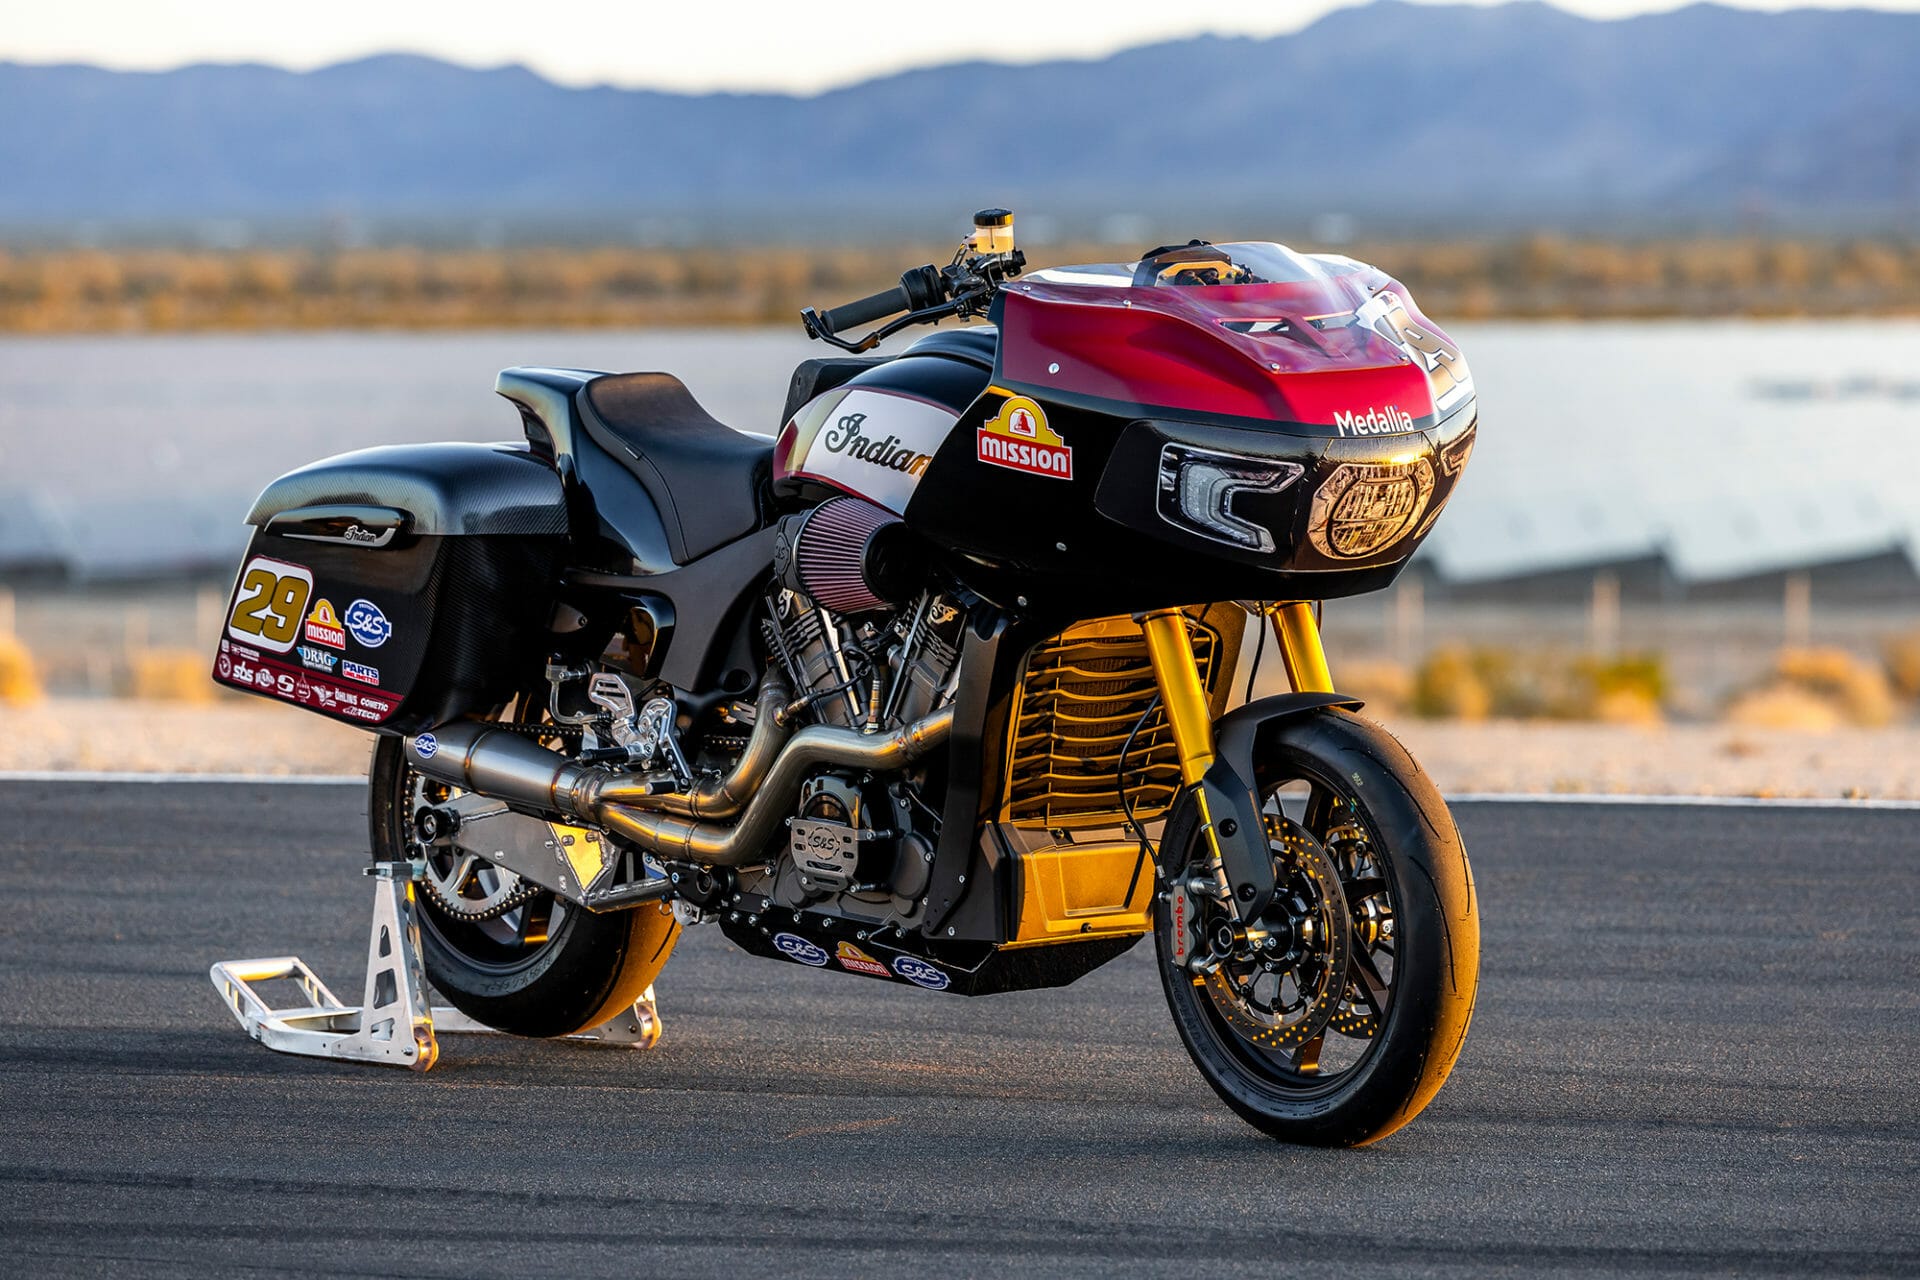 The Indian Challenger RR – A tribute to the King of the Baggers champion Tyler O’Hara